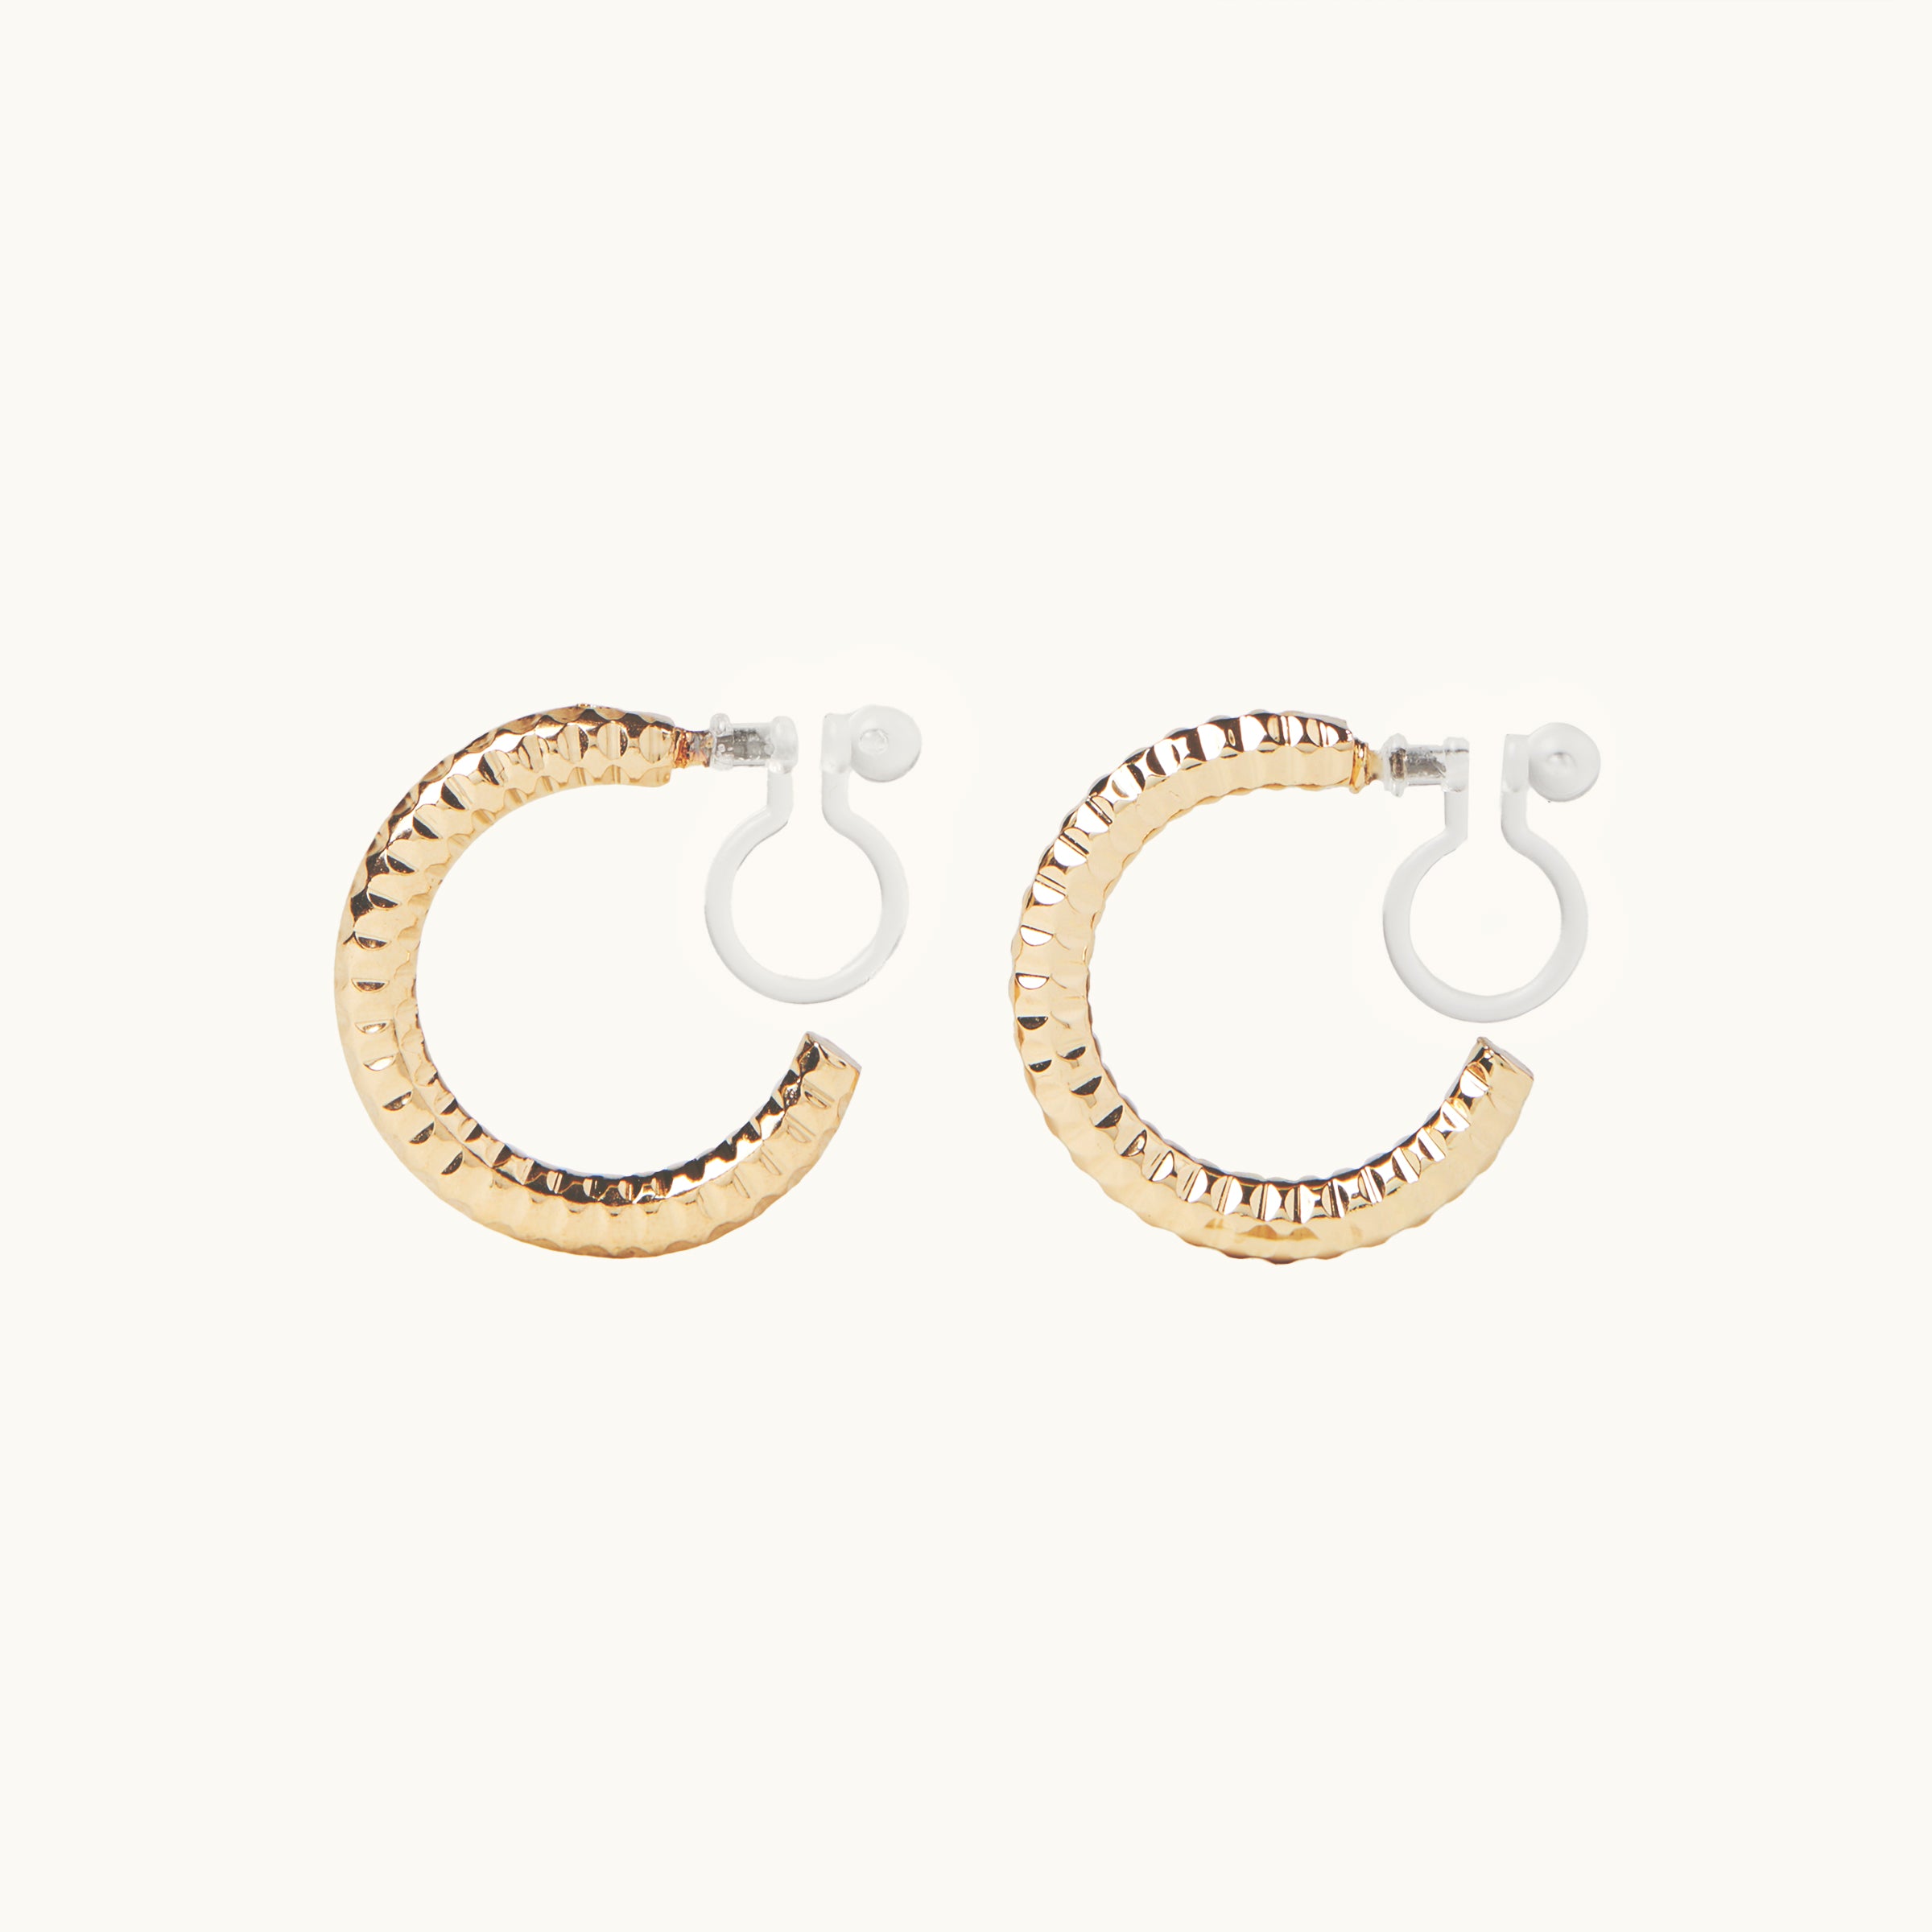 Image of the Ribbed Hoop Clip On Earrings in Gold. Made with a Resin Clip-On closure, these earrings provide a secure hold for 8-12 hours and are suitable for all ear sizes and types. Elevate your look with these versatile and long-lasting earrings. Set includes one pair.